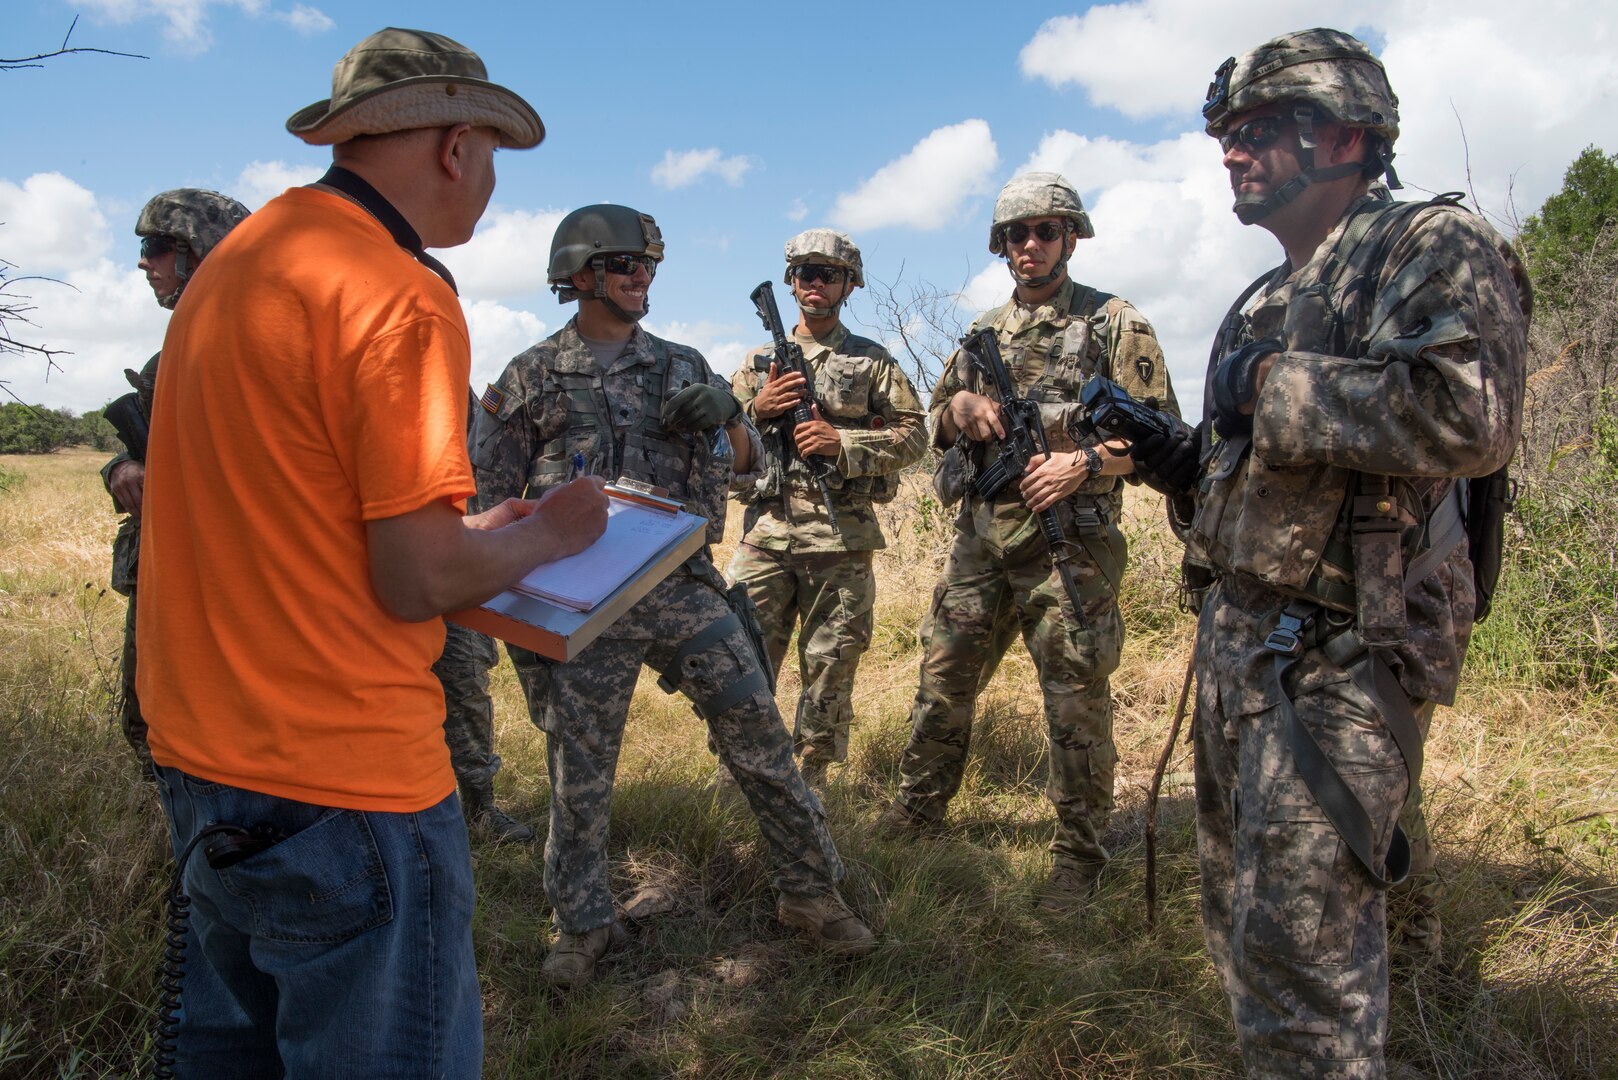 Soldiers from Texas Army National Guard Company C, 2-149 Aviation speak to Col. Kjäll Gopaul, mission pathfinder and Air Force Personnel Operations Agency deputy director, June 15, 2018, during a personnel recovery mission during Operation Lone Star Vigilance at Joint Base San Antonio-Camp Bullis, Texas. Soldiers were required to negotiate with military members role playing as friendly foreign nationals in order to call in an evacuation. (U.S. Air Force photo by Airman Shelby Pruitt)